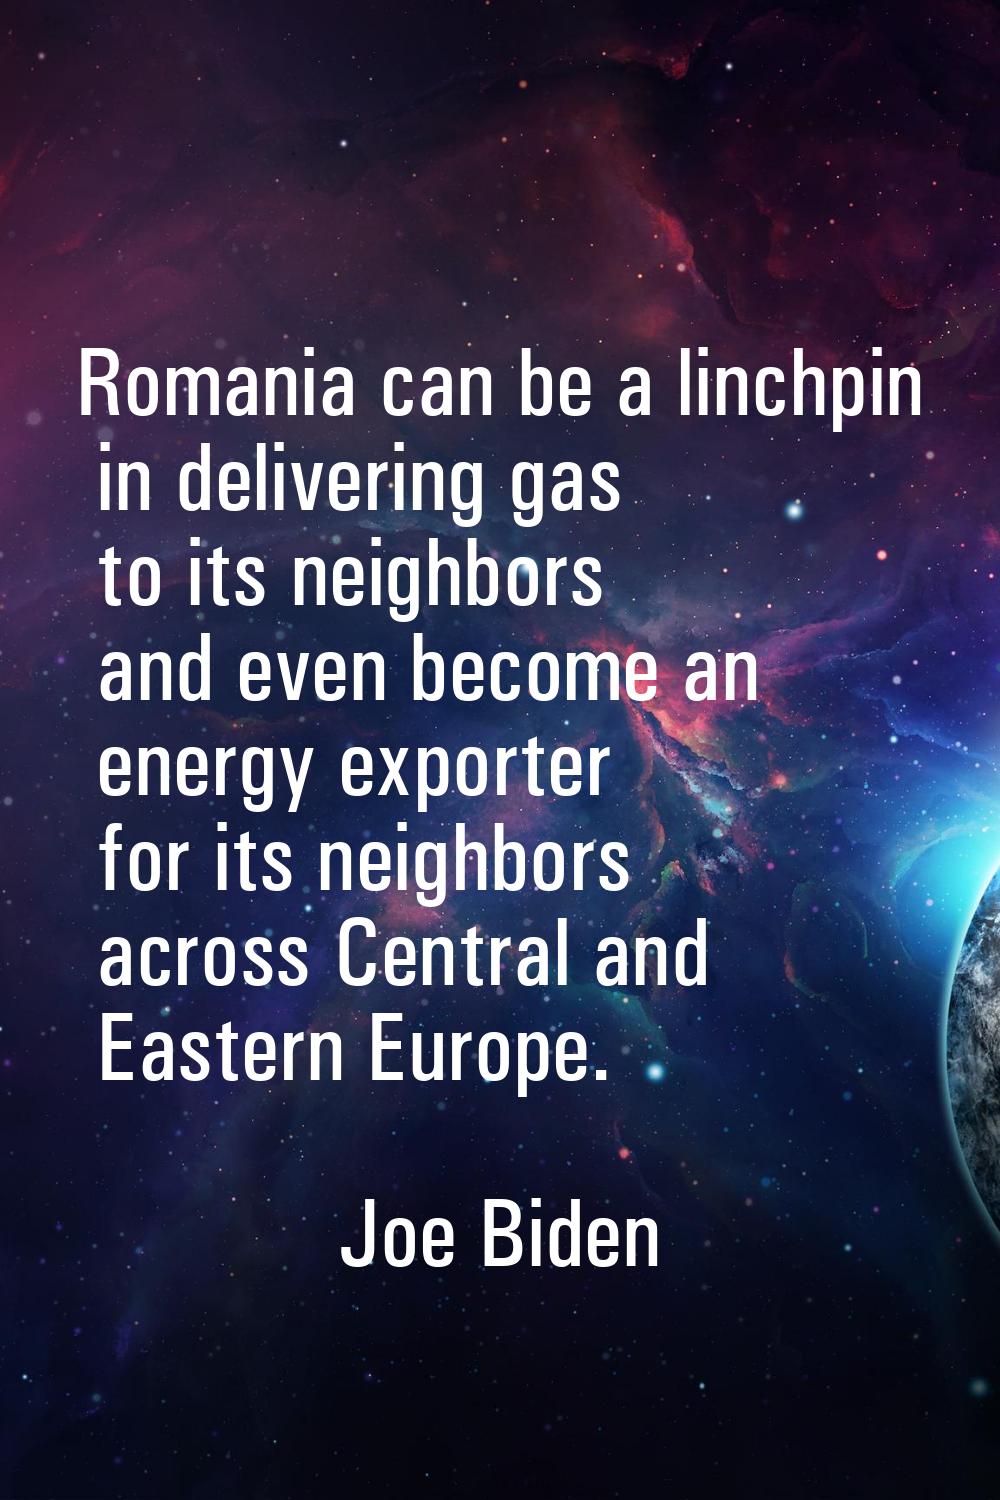 Romania can be a linchpin in delivering gas to its neighbors and even become an energy exporter for